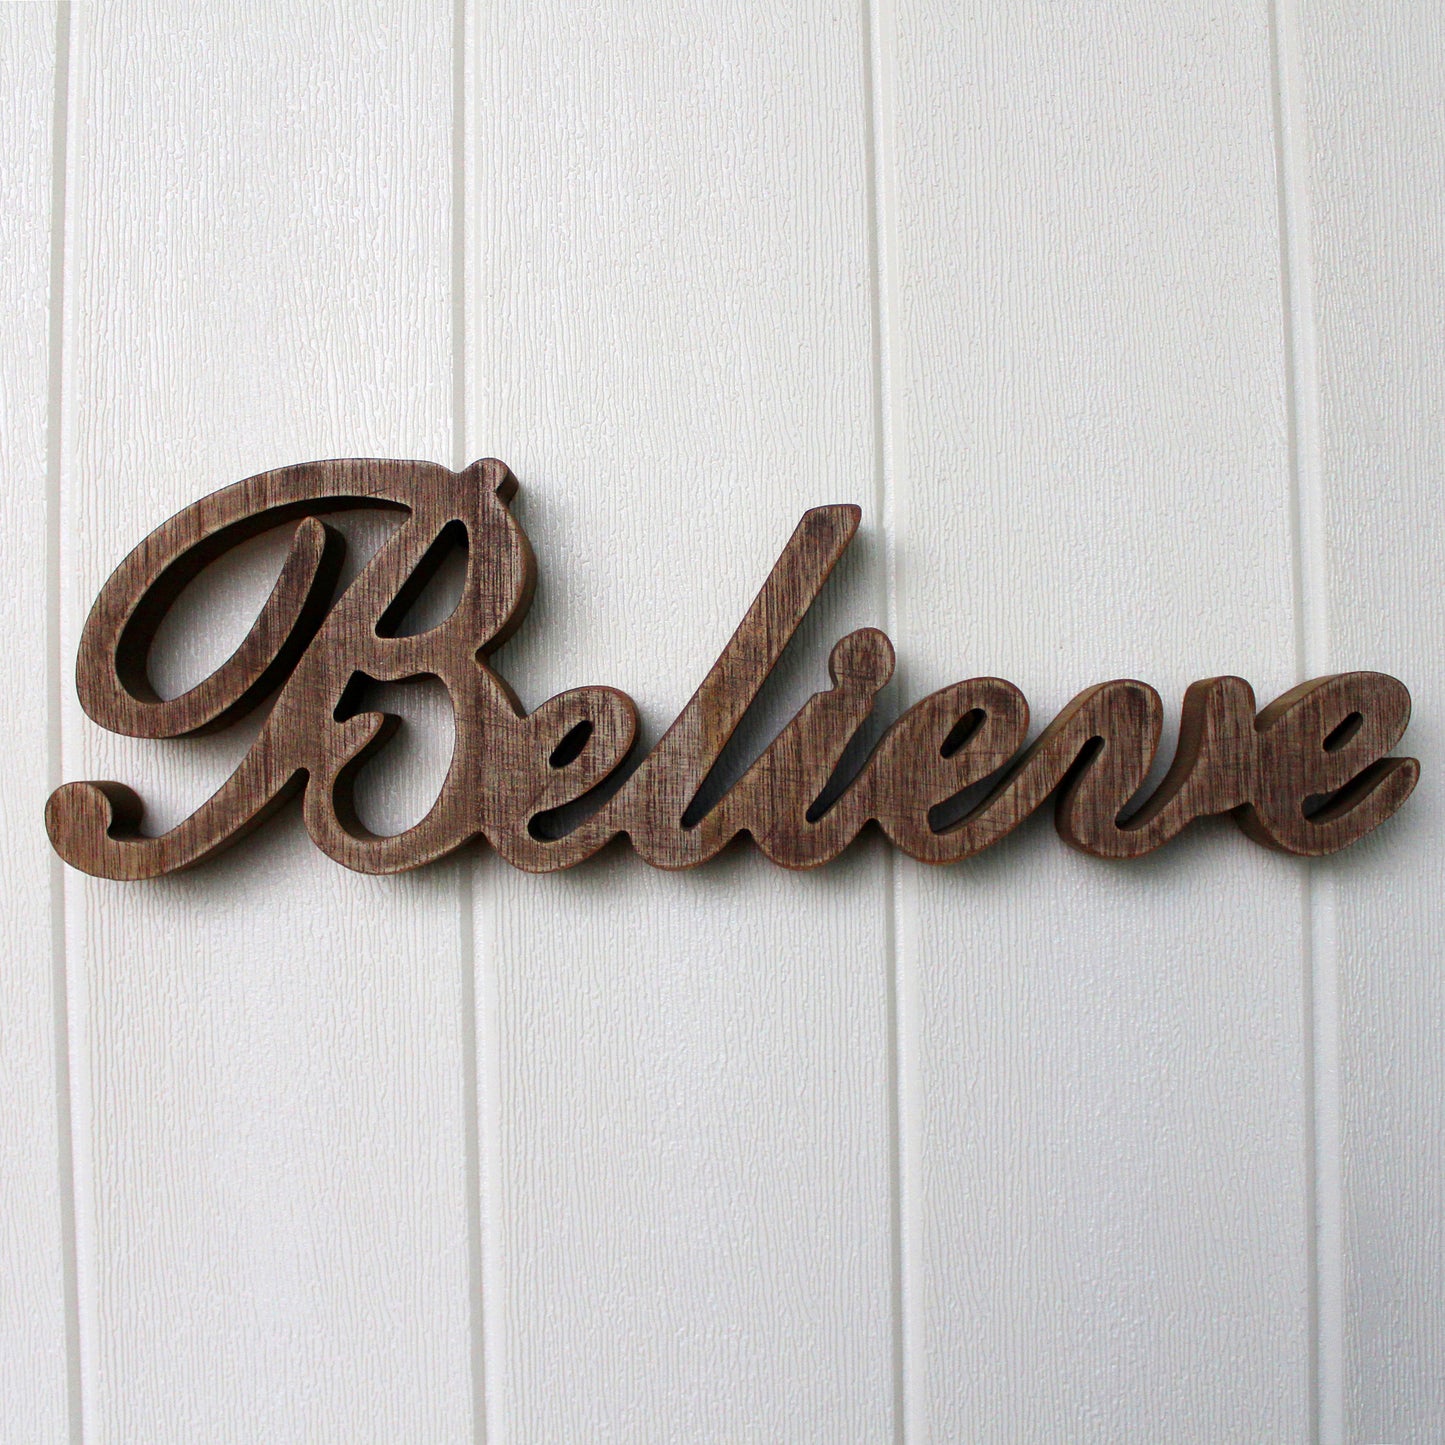 CVHOMEDECO. Rustic Vintage Distressed Wooden Words Sign Free Standing "Believe" Tabletop/Shelf/Home Wall/Office Decoration Art, 14.25 x 4.25 x 1 Inch